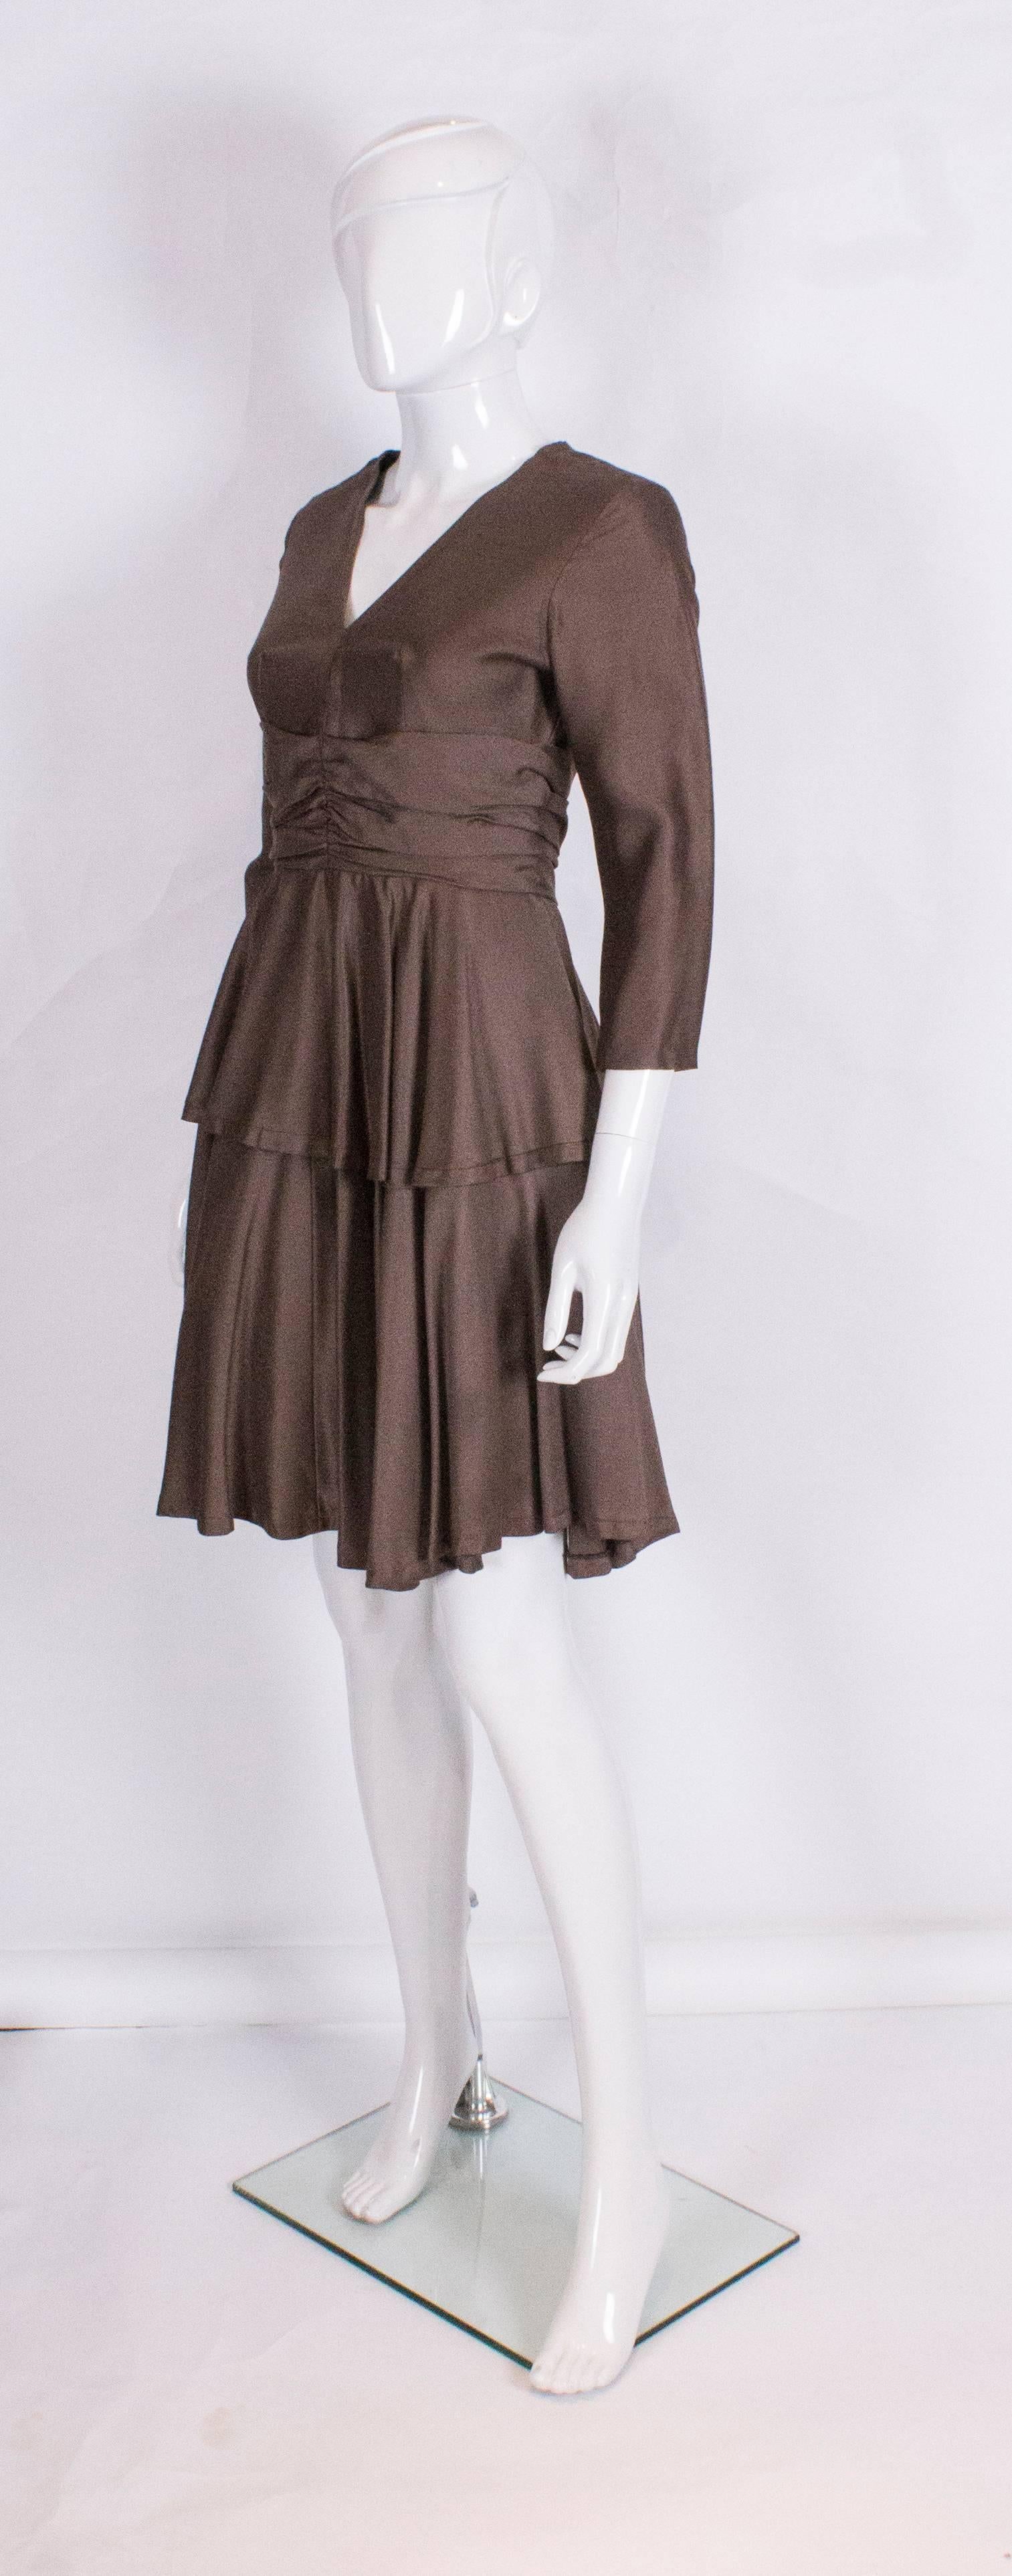 A chic cocktail dress by British designer Jane Varon.
The dress has a v neckline ,elbow length sleeves, a net underskirt, and peplum like detail.